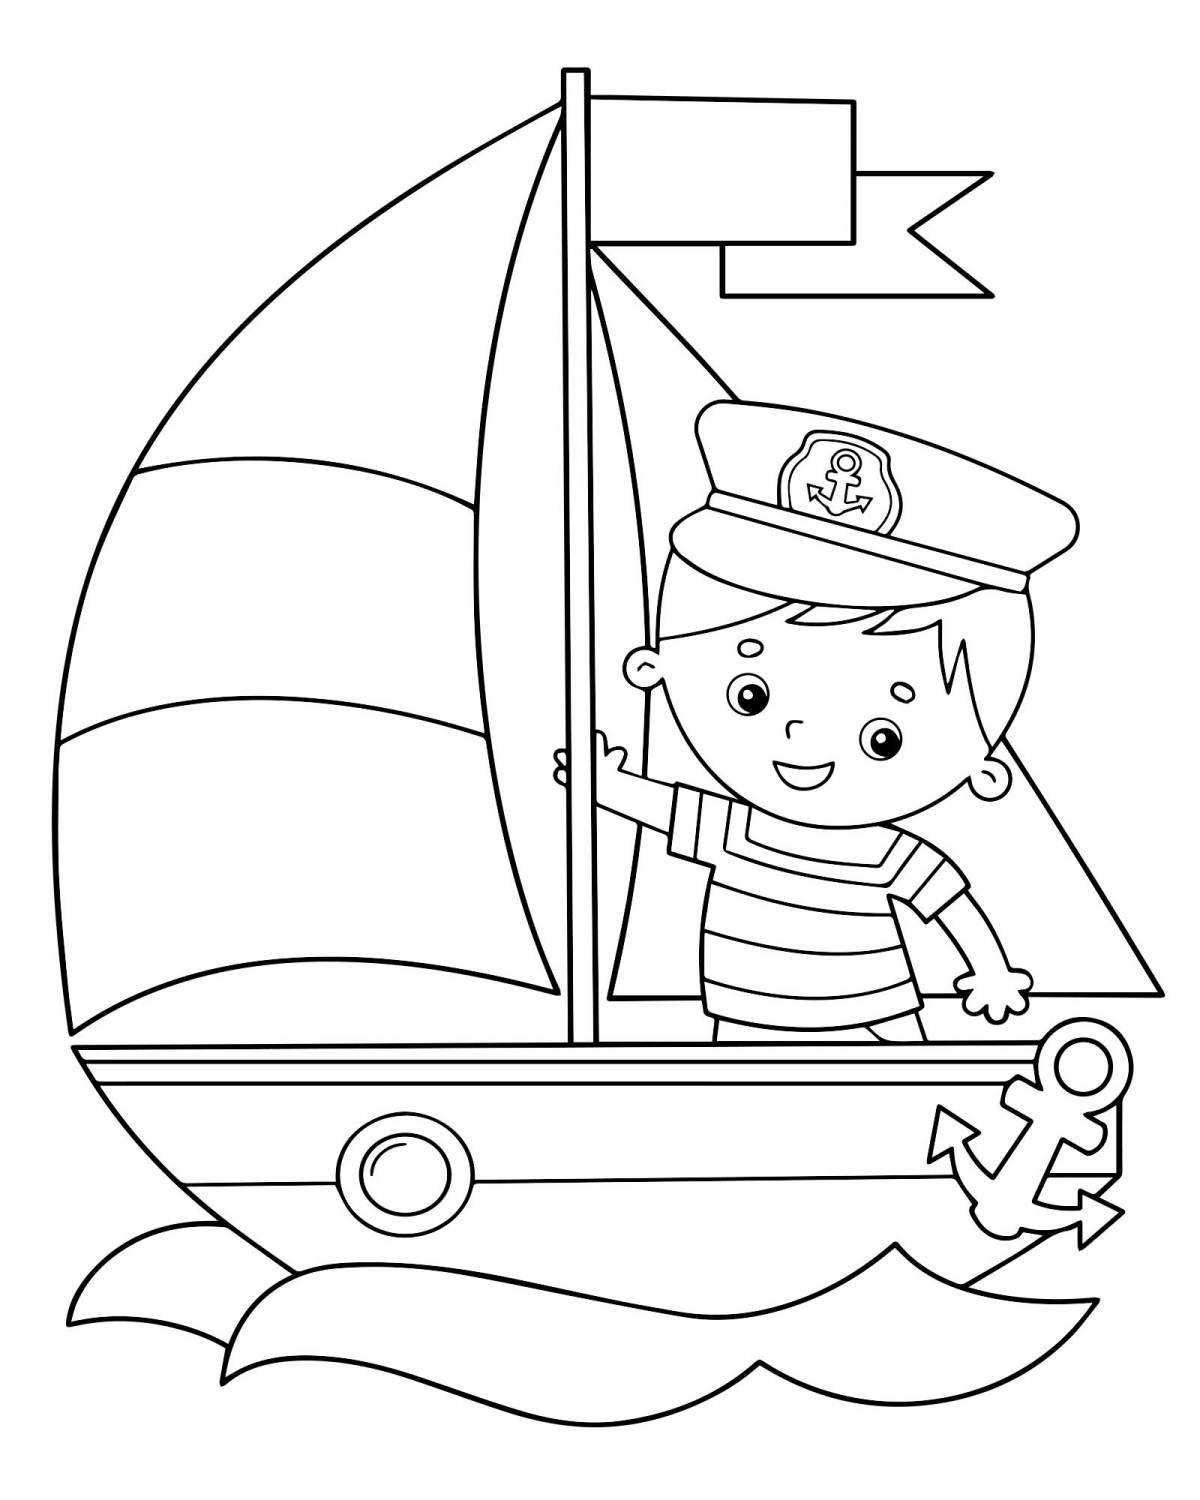 Colorful-sailor-picture sailor coloring book for kids